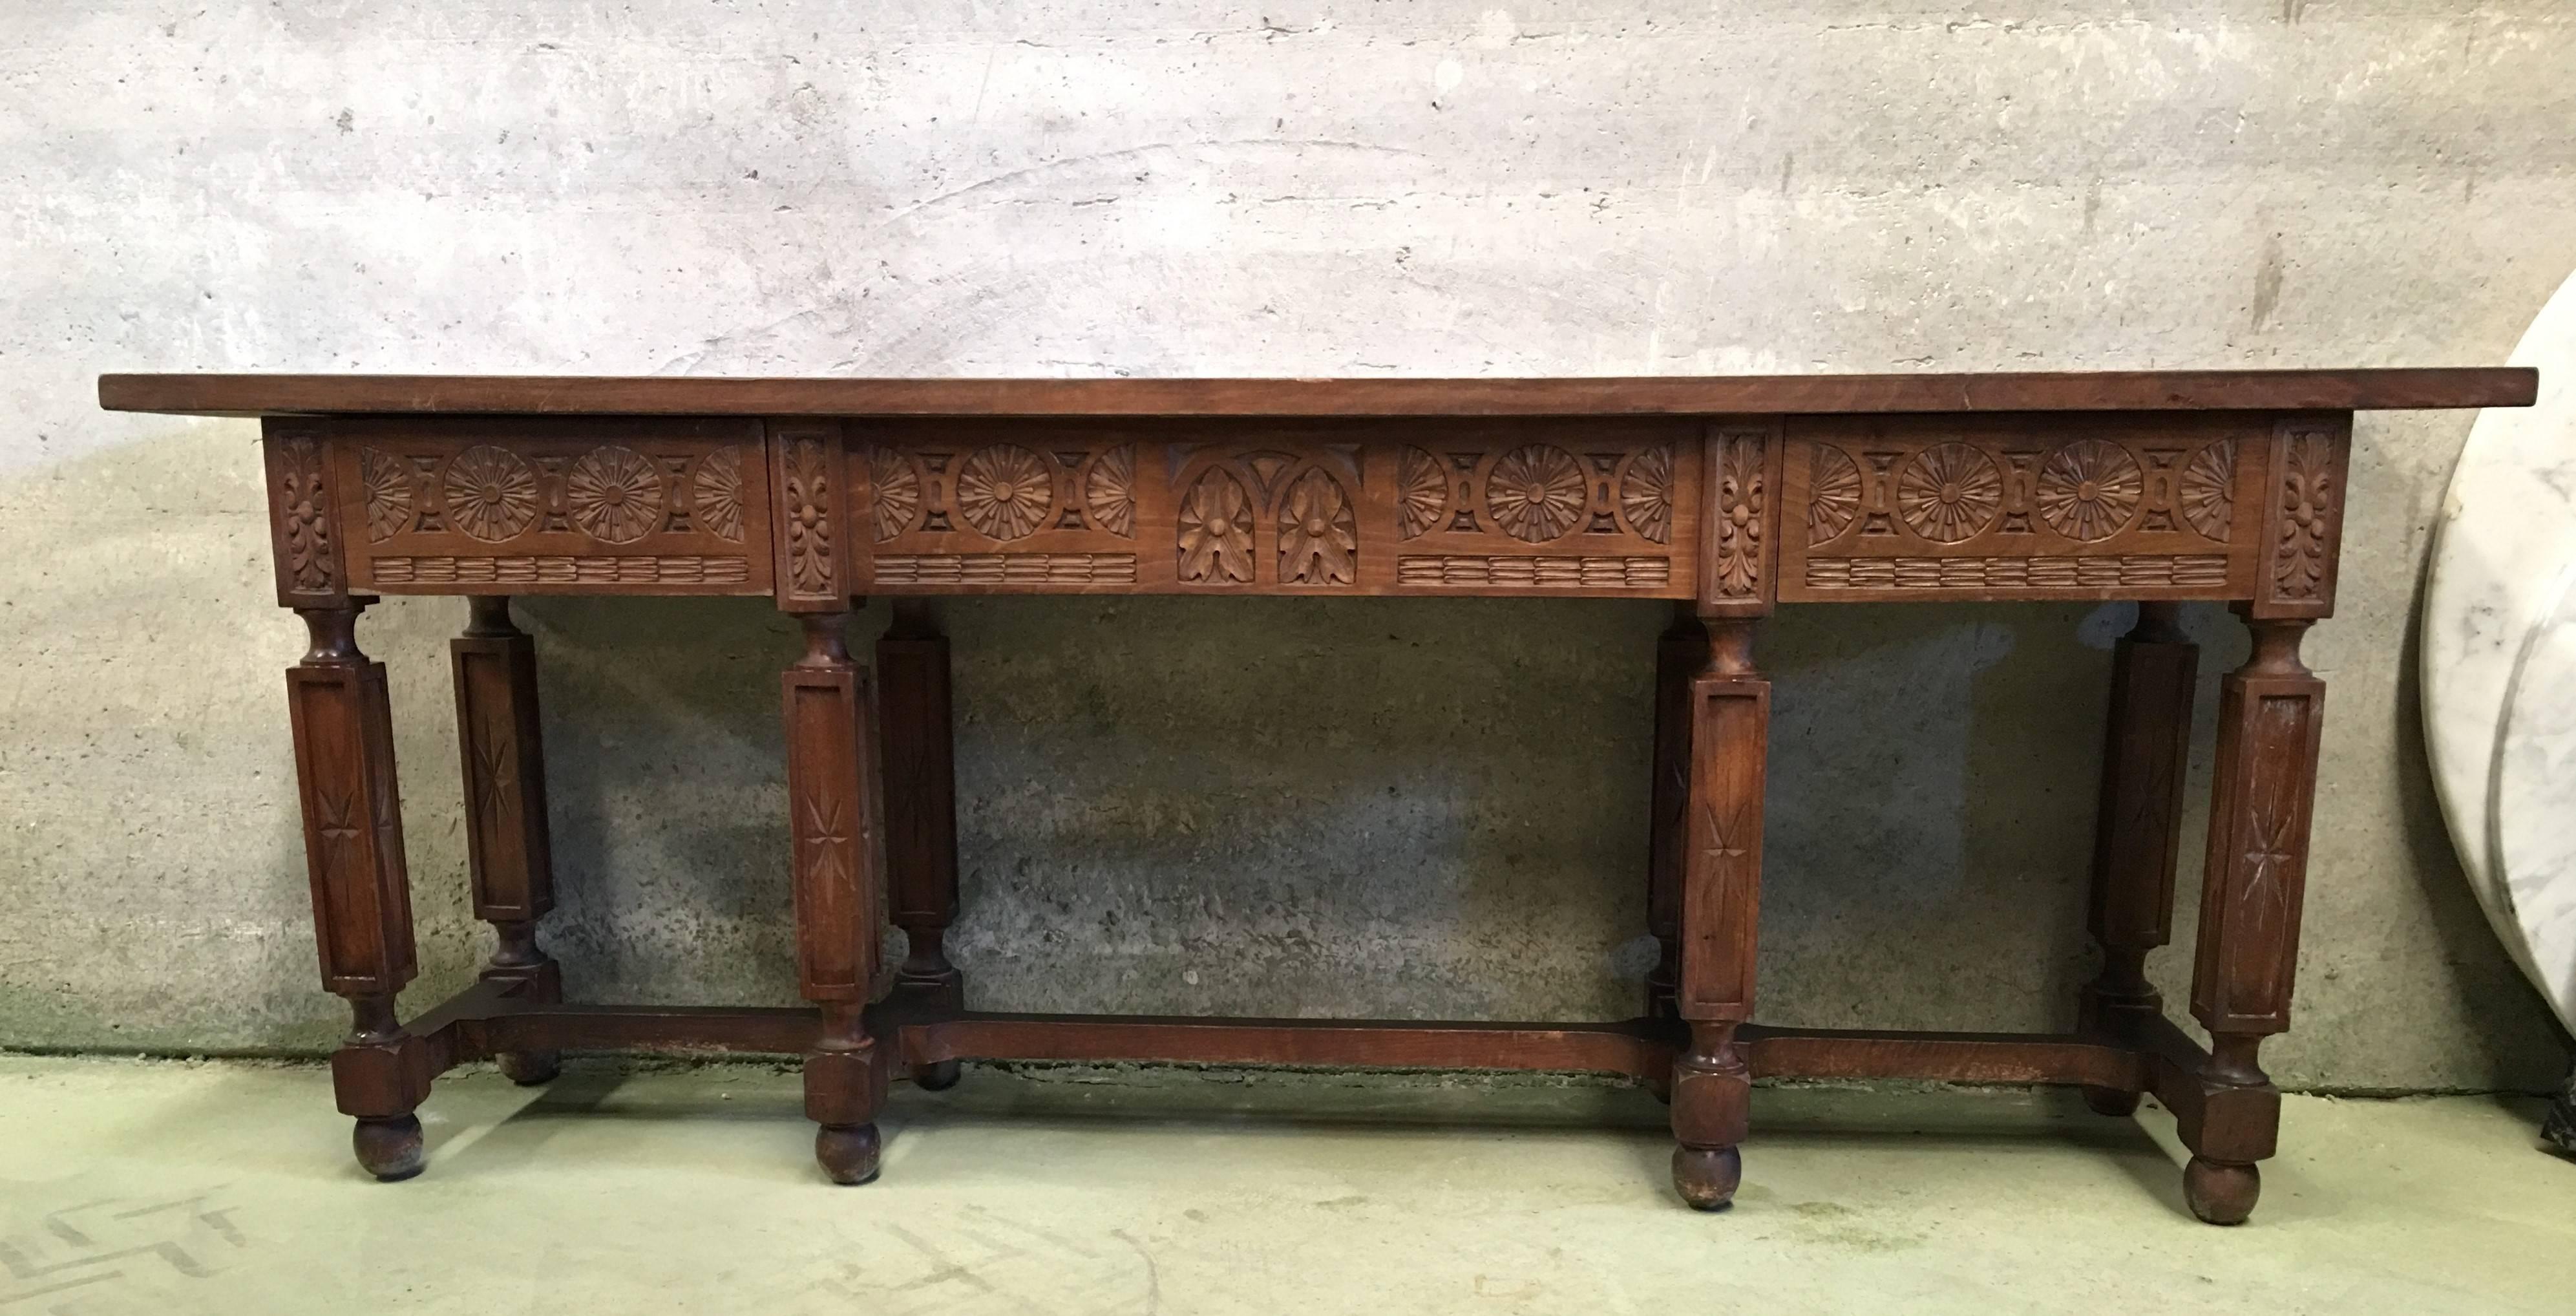 Baroque 19th Century Spanish Carved Walnut Bench or Low Table with Two Drawers